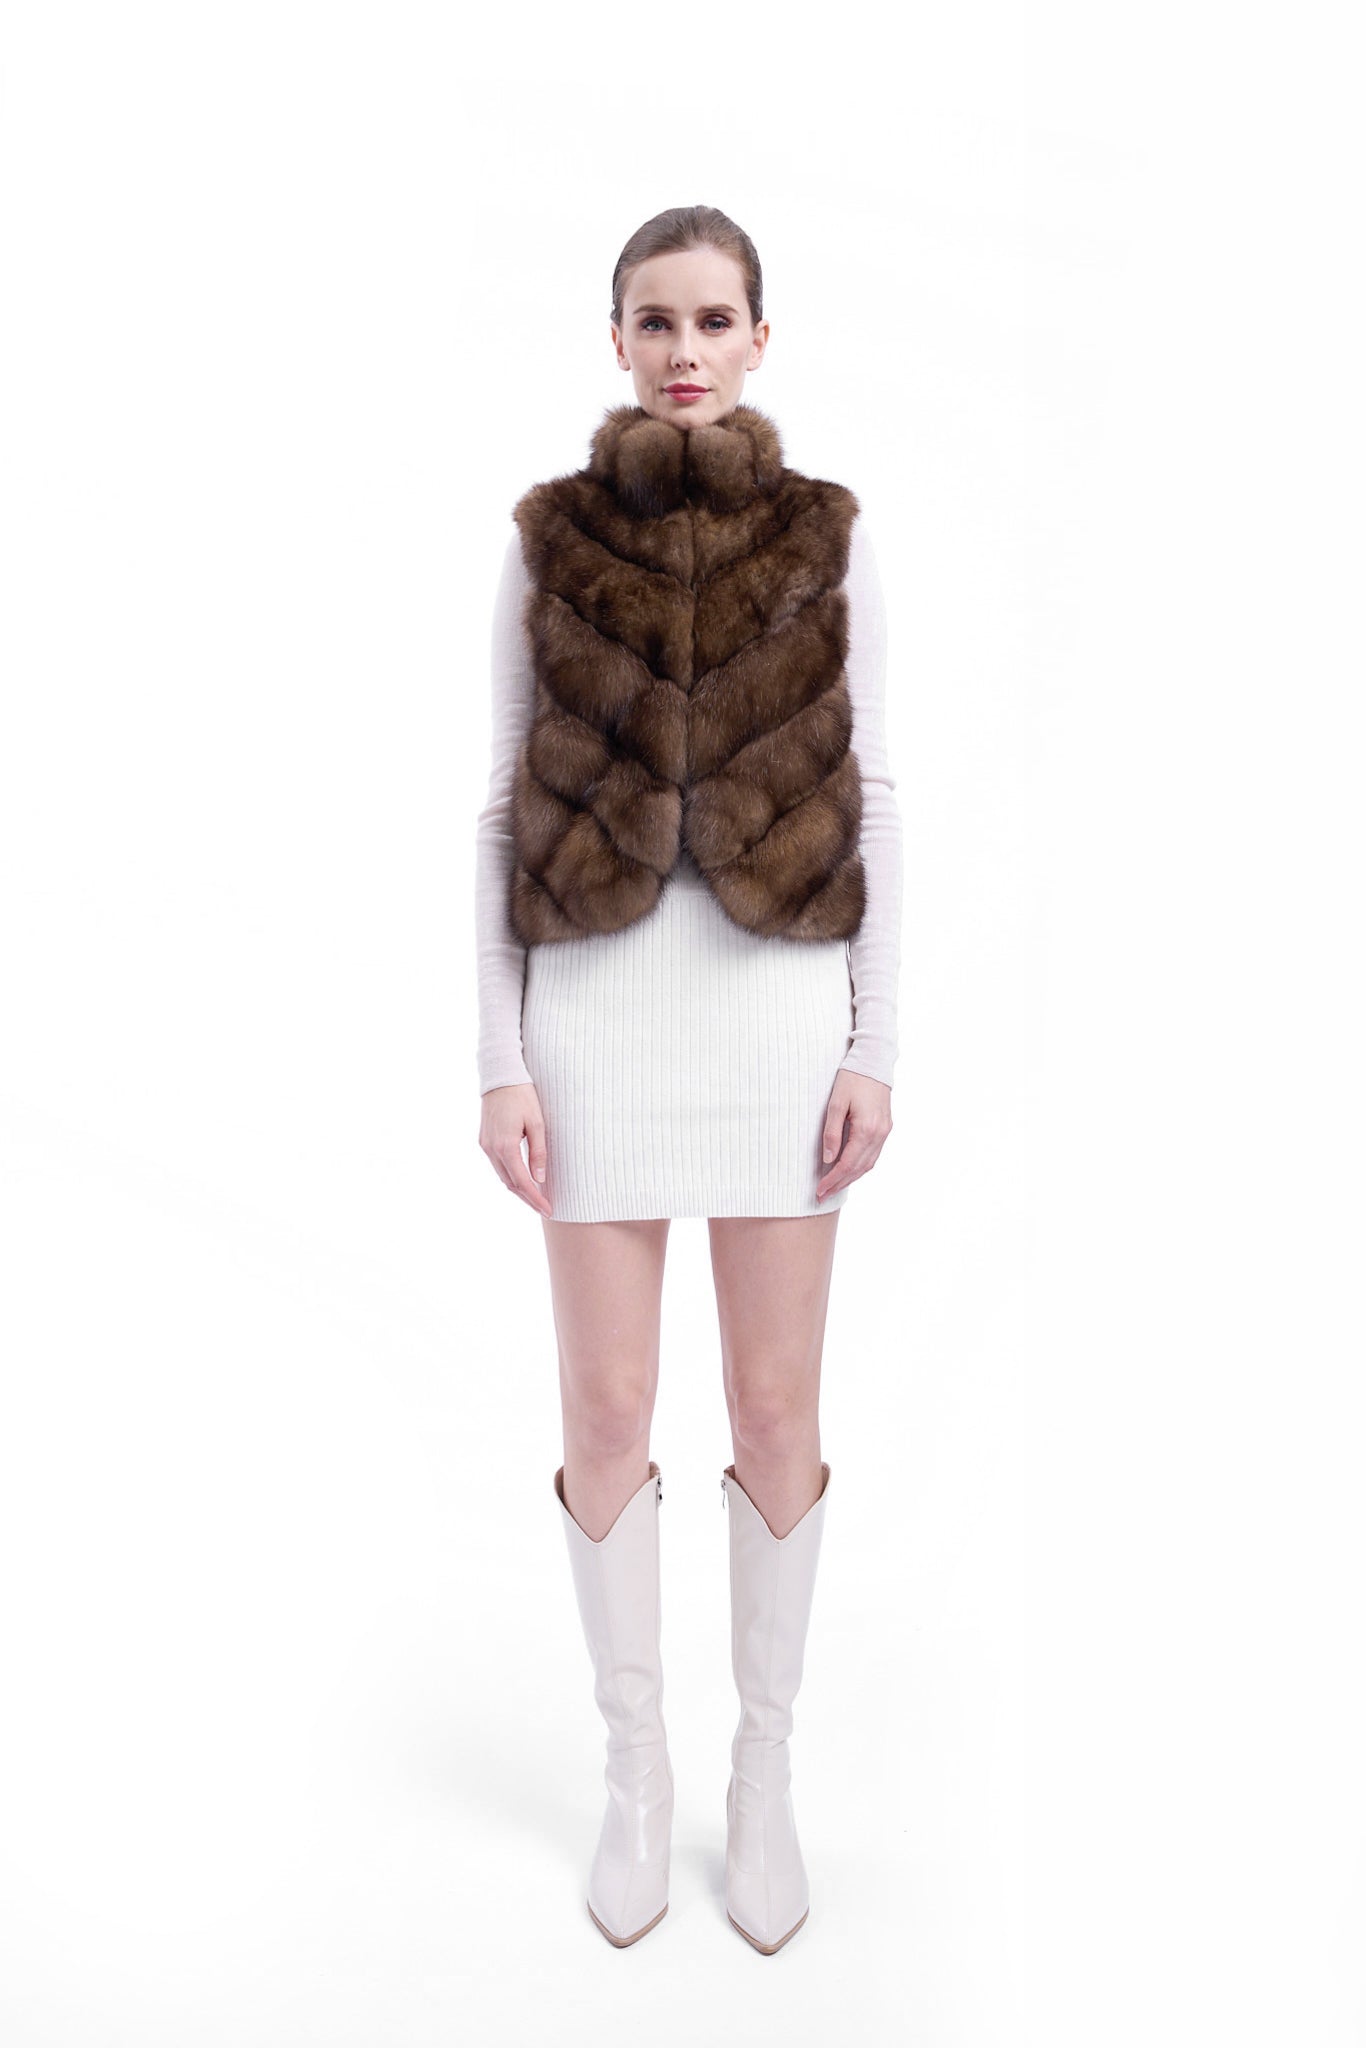 Sleek and Chic: Sable Fur Vest with Tailored Fit